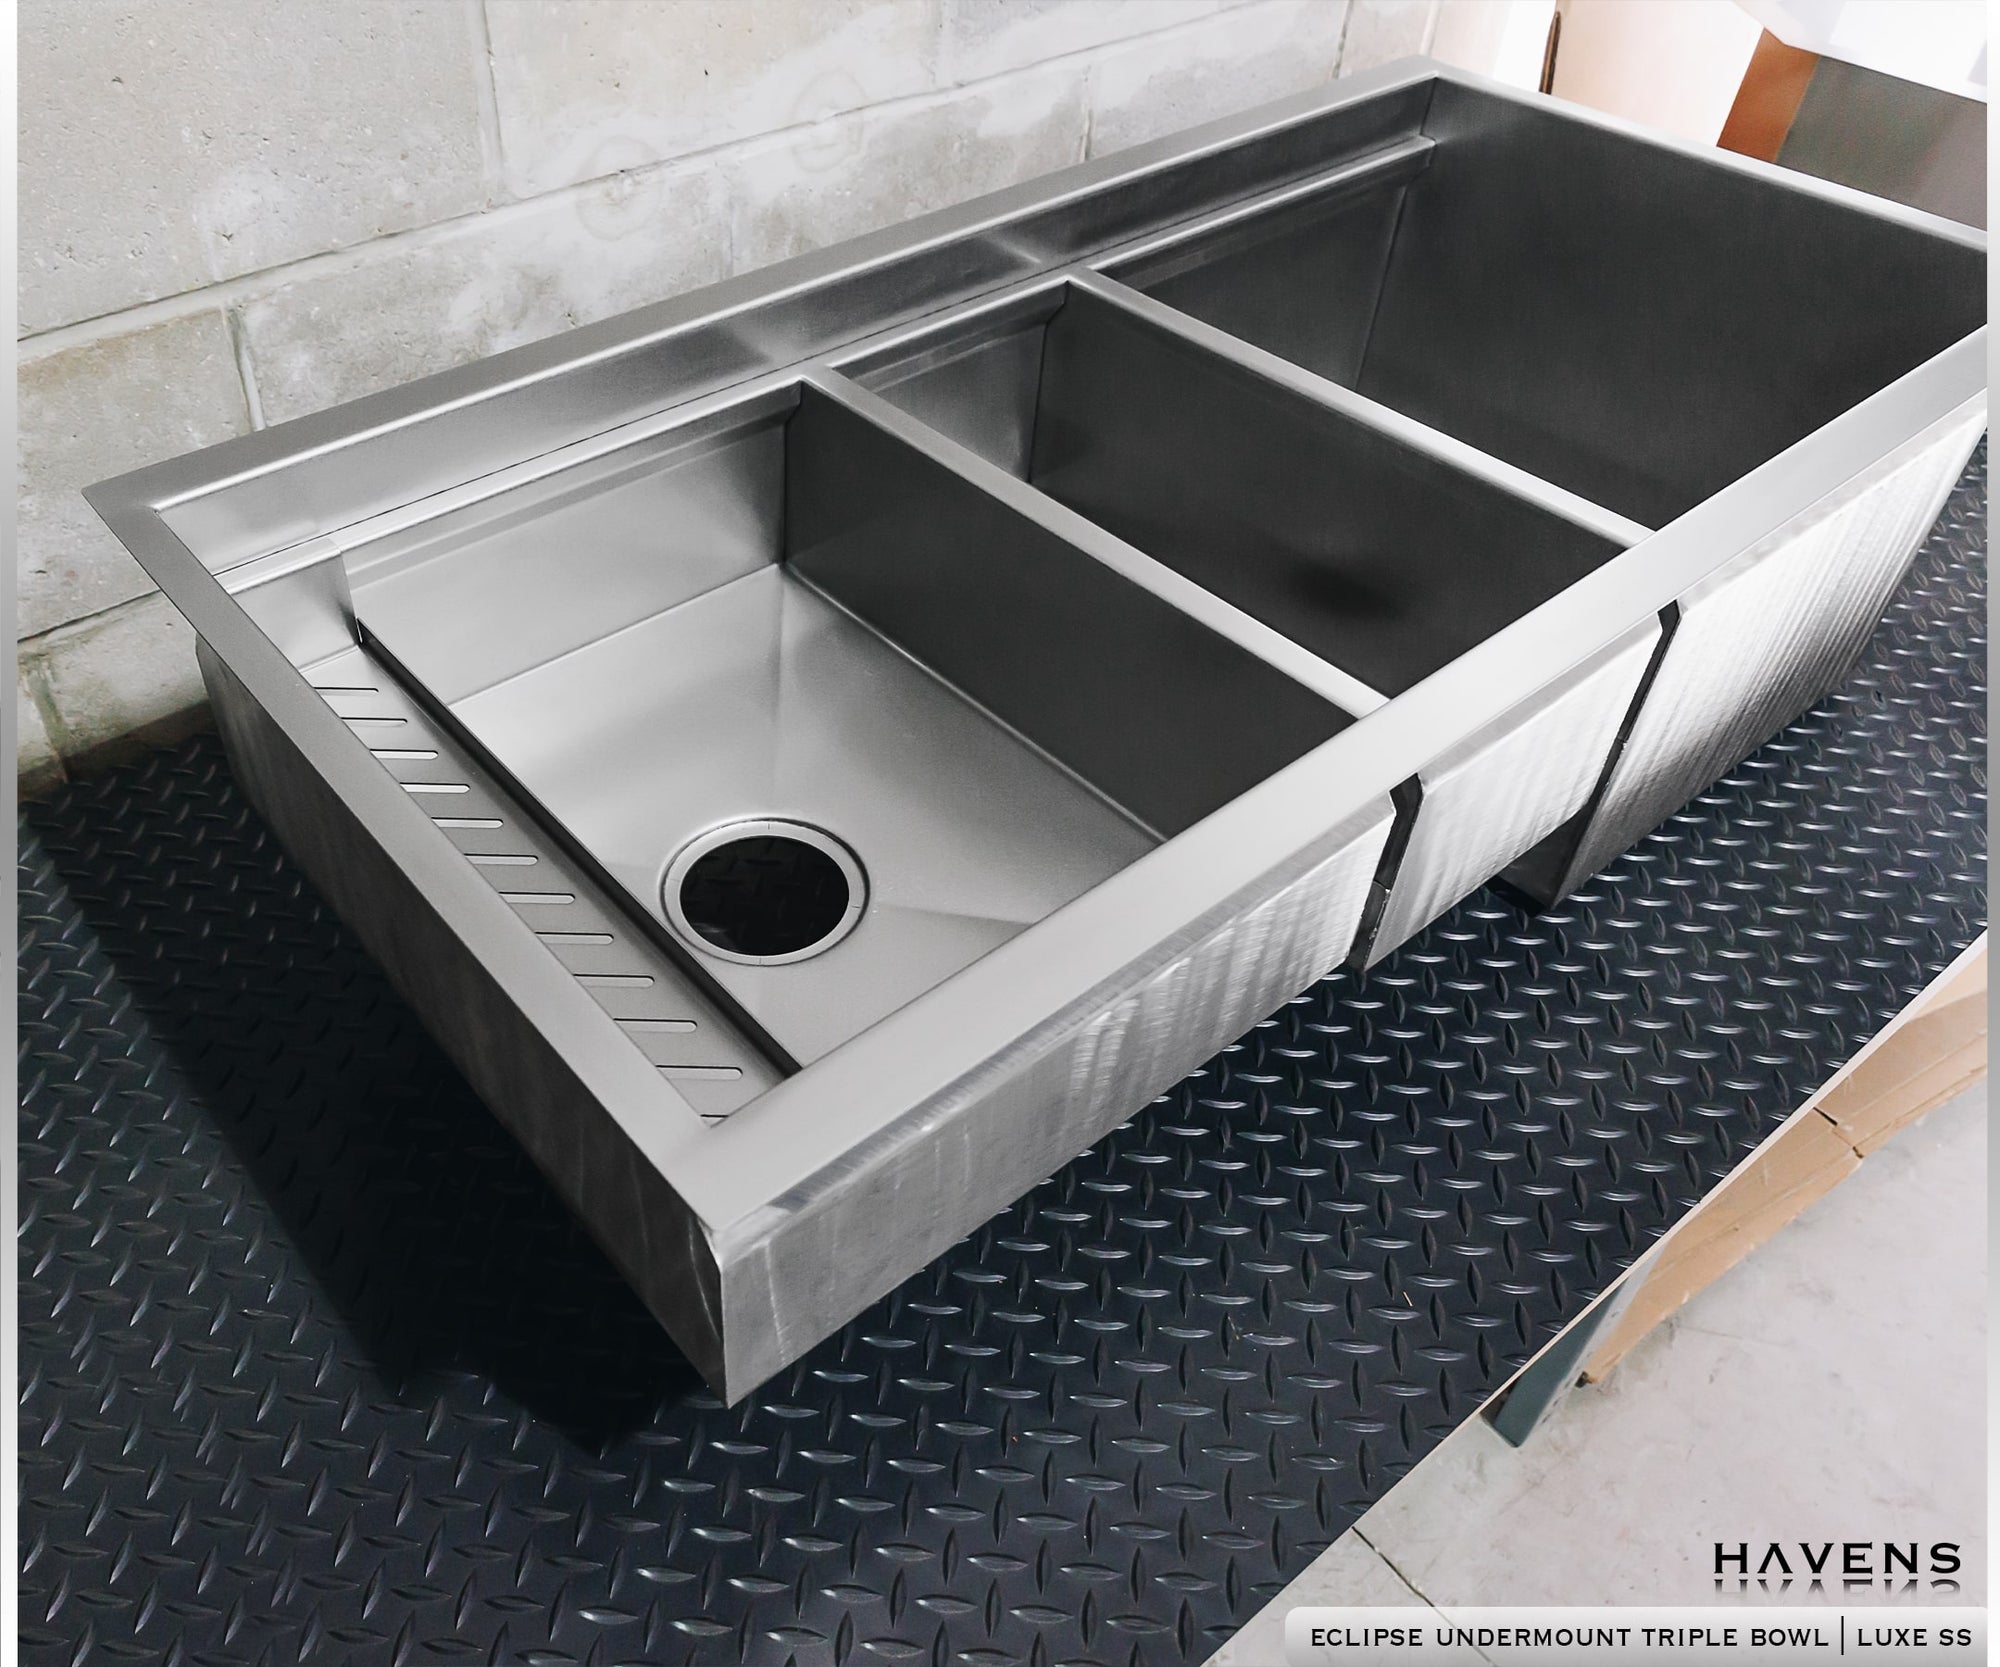 Legacy Triple Bowl Sink - Stainless